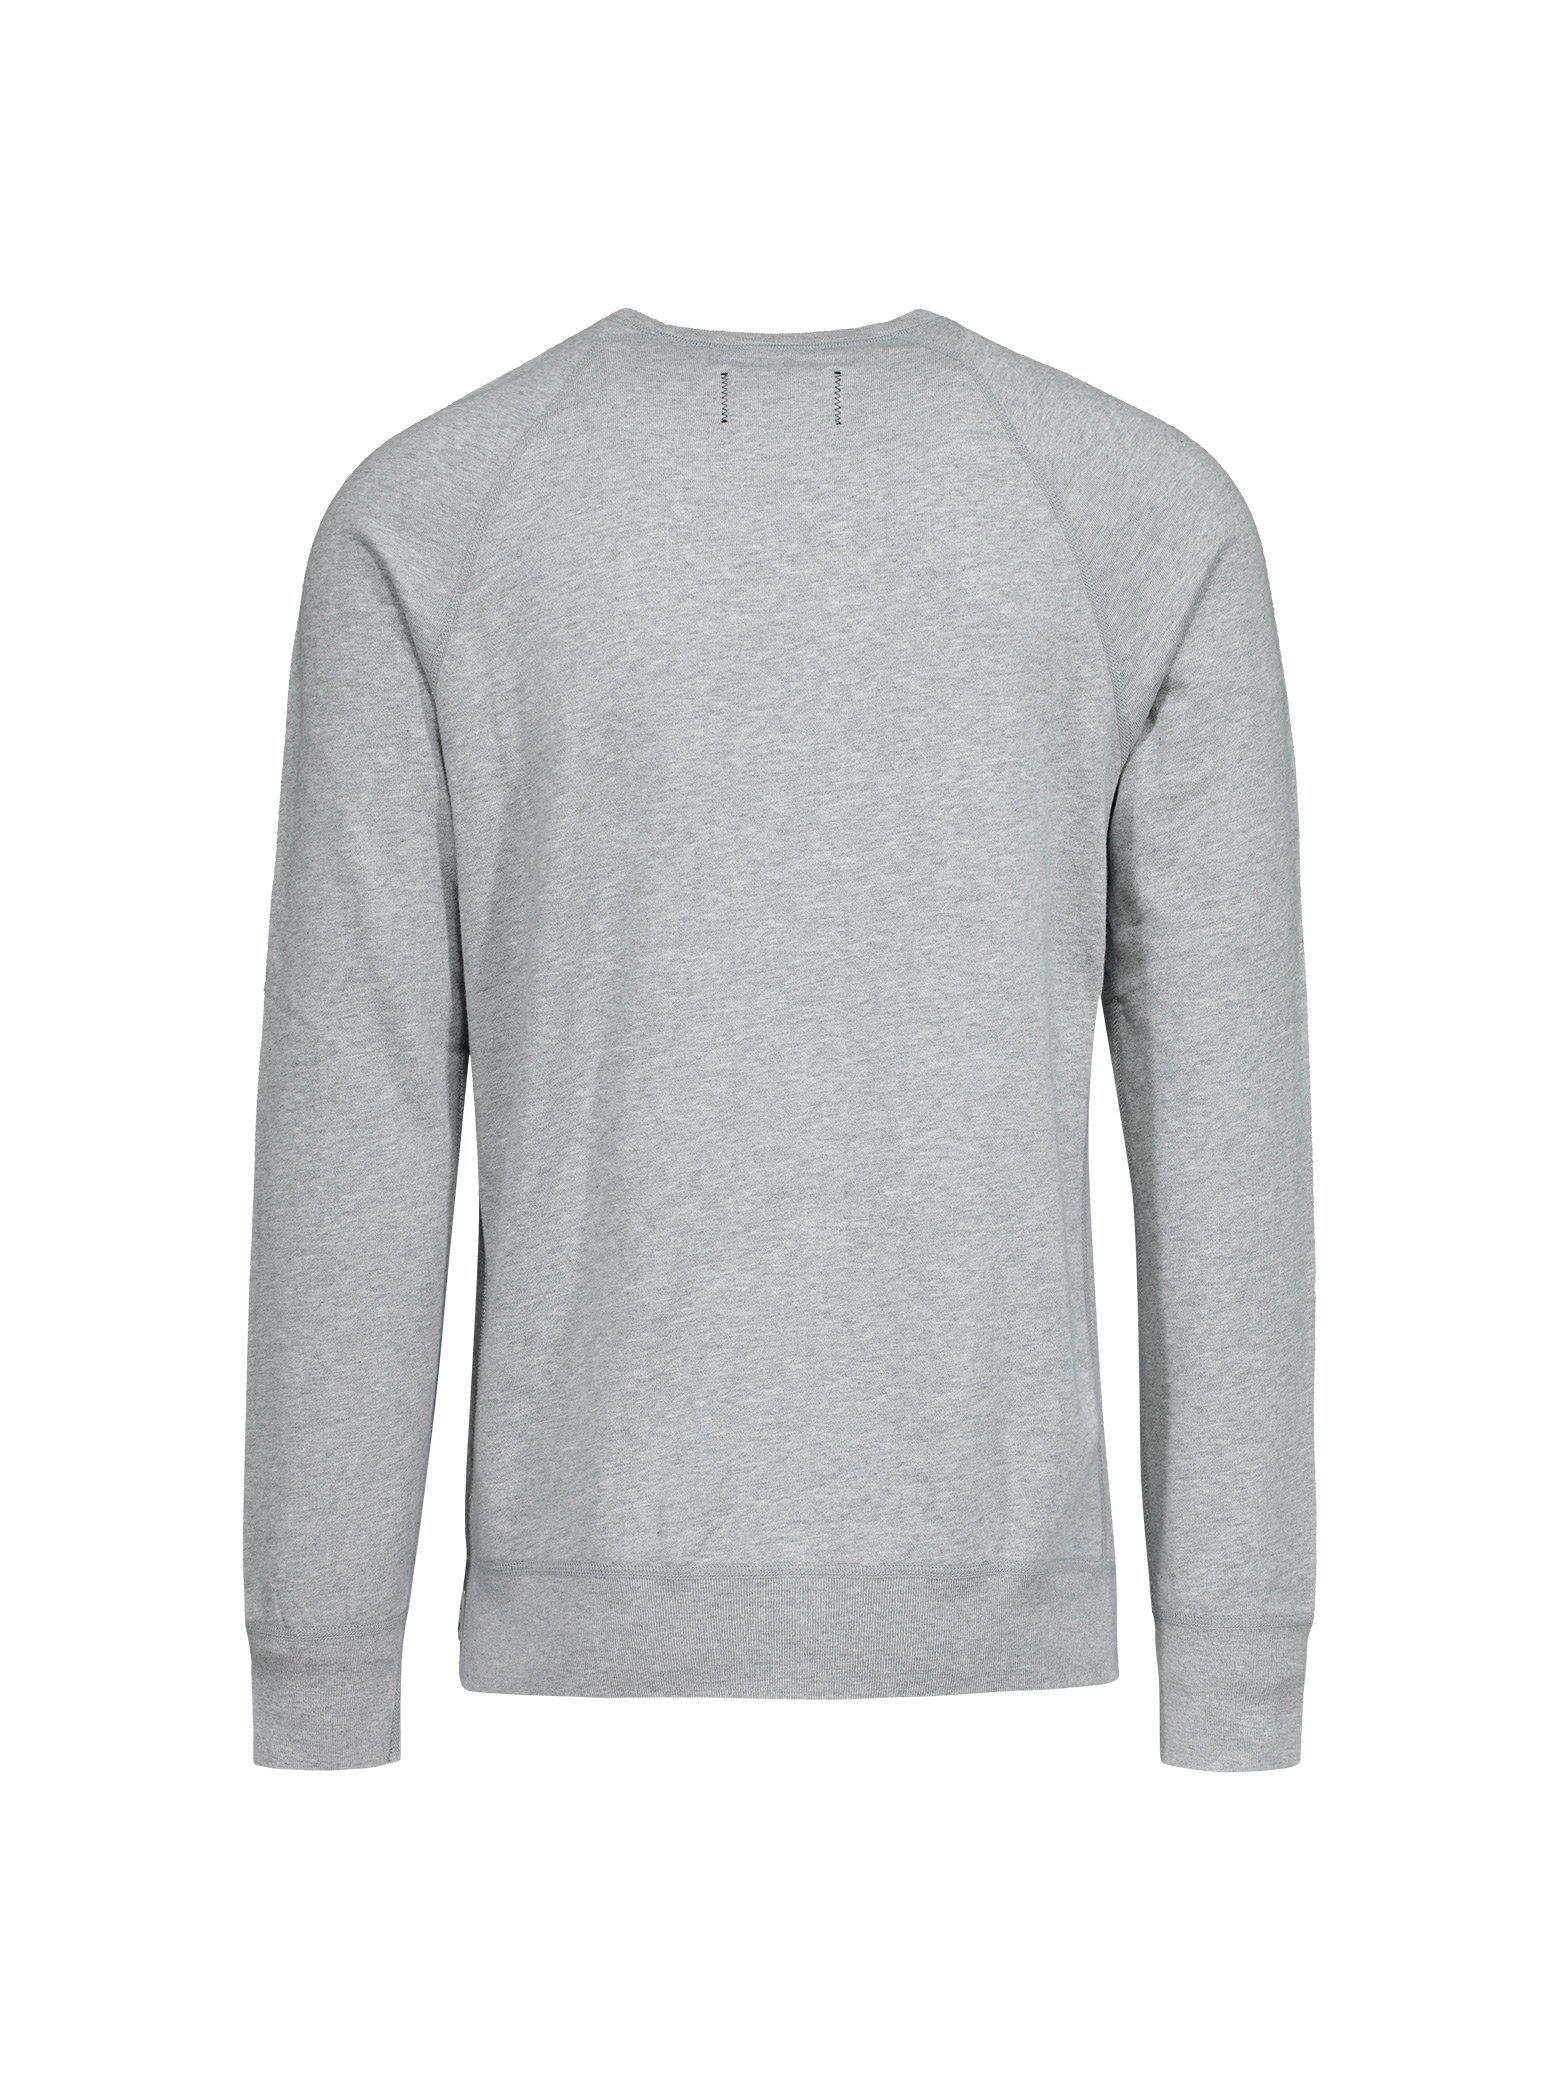 Reigning Champ Knit Lightweight Terry Crewneck in Gray for Men - Lyst